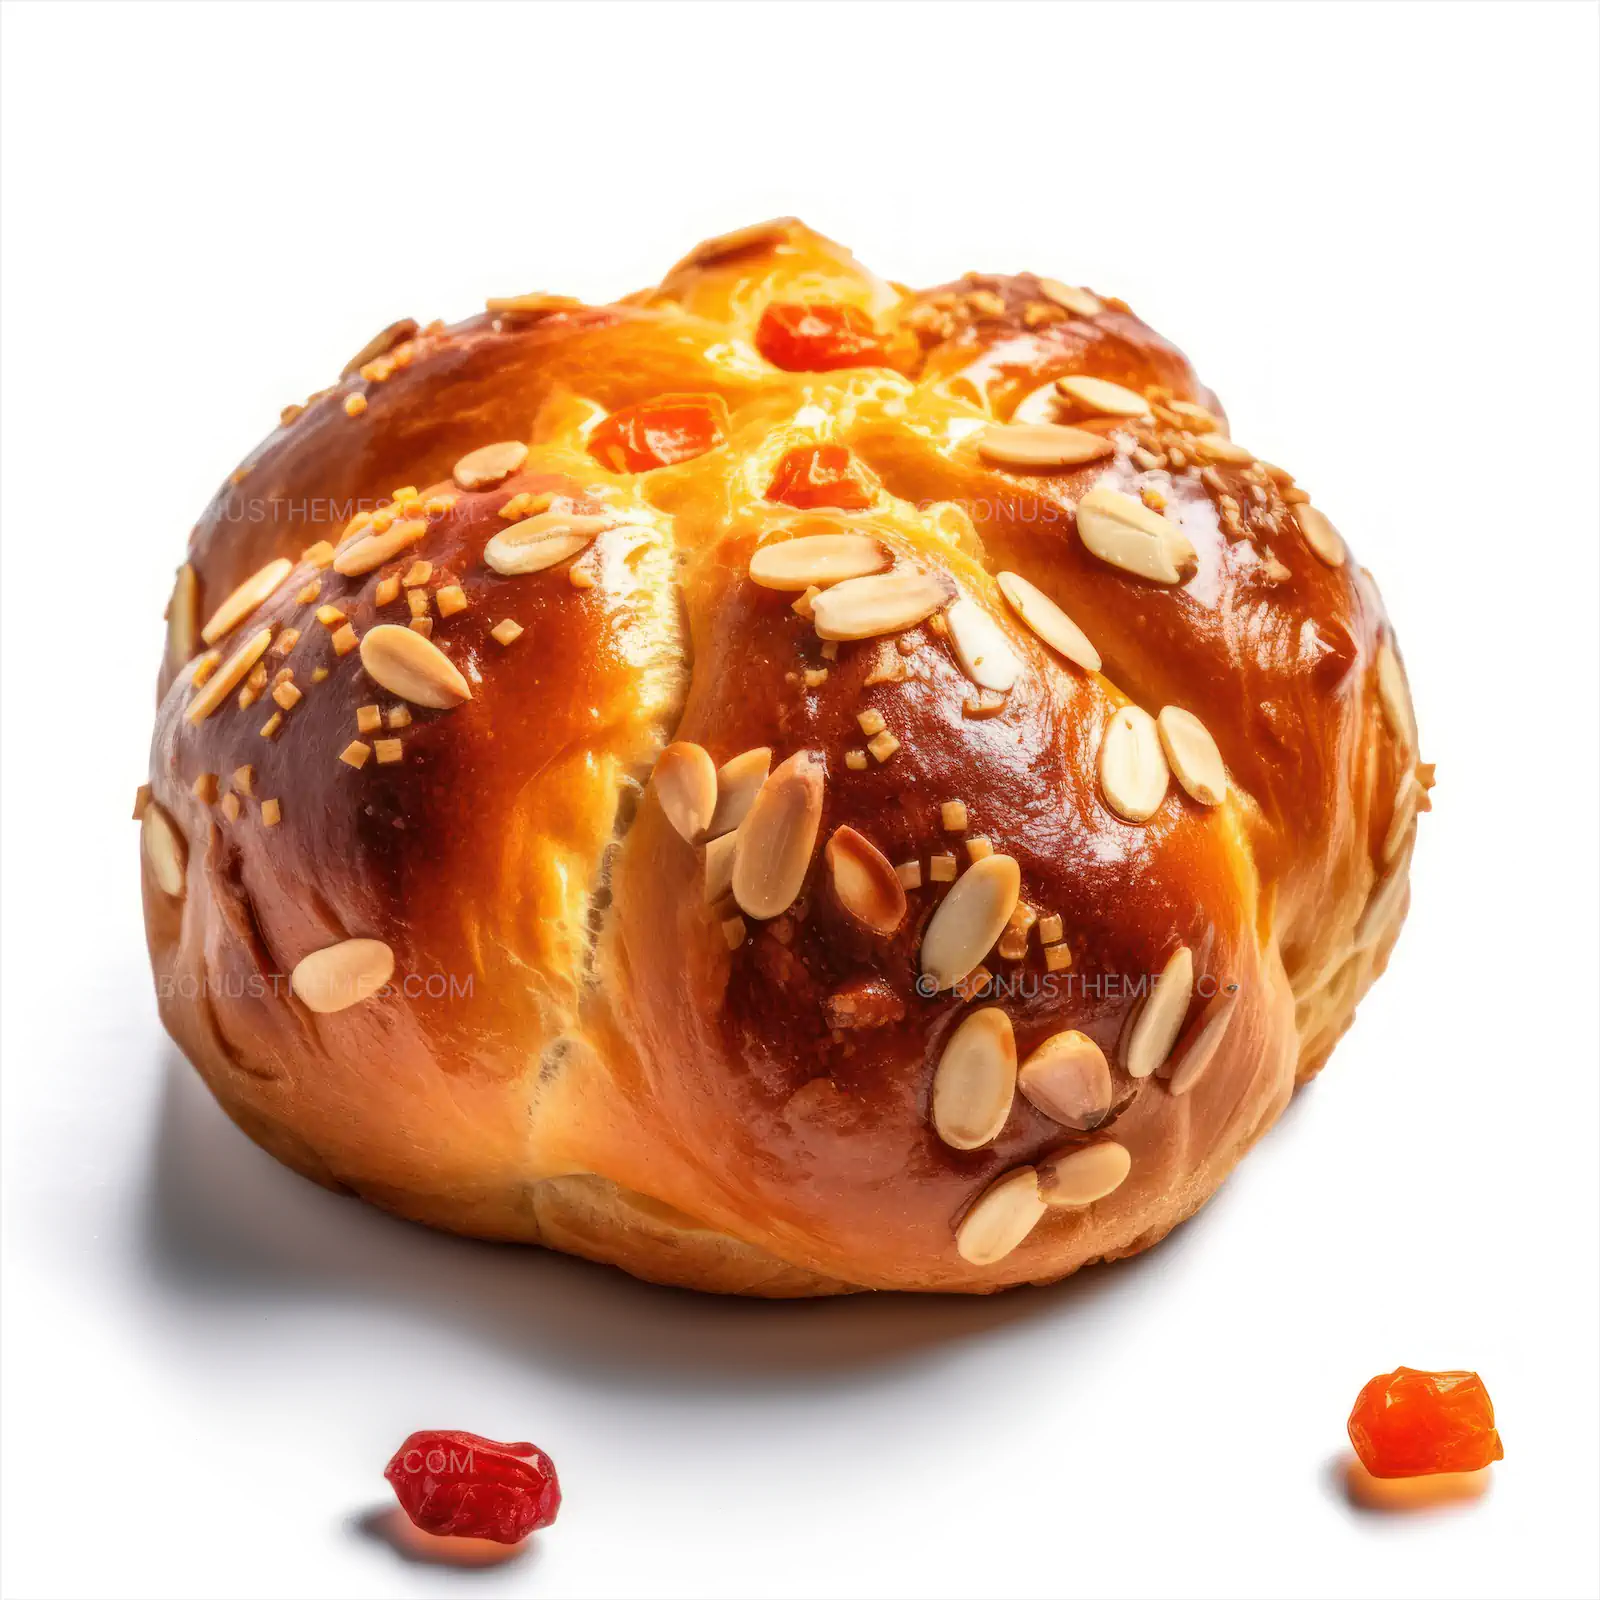 Greek sweet bread flavored with orange zest on isolated white background